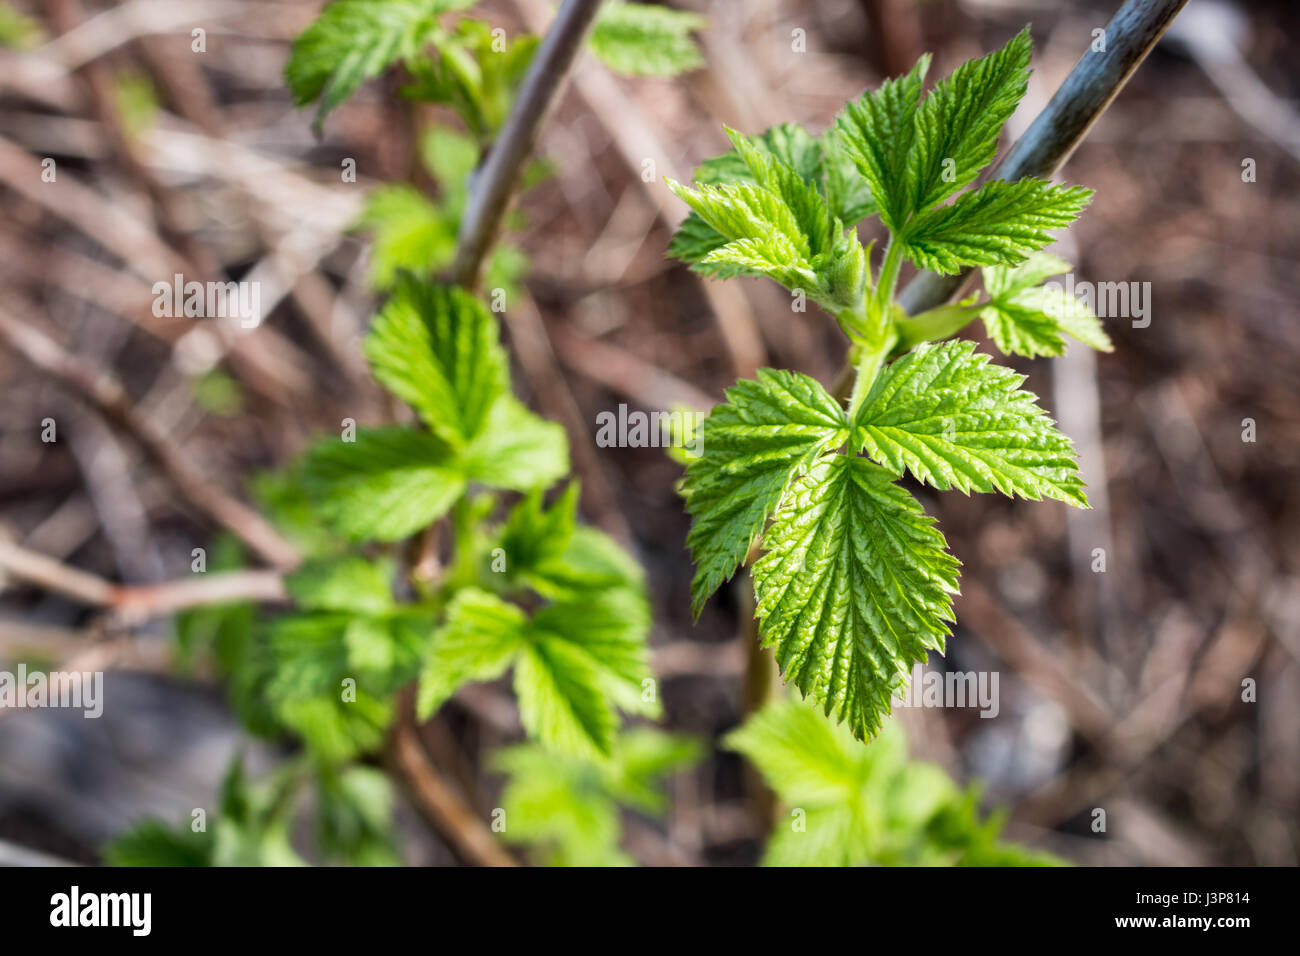 the burned leaves on the sun, leaves in yellow spots, the damaged leaves, the changed leaves, a crimson branch, a raspberry bush, a green bush. Stock Photo